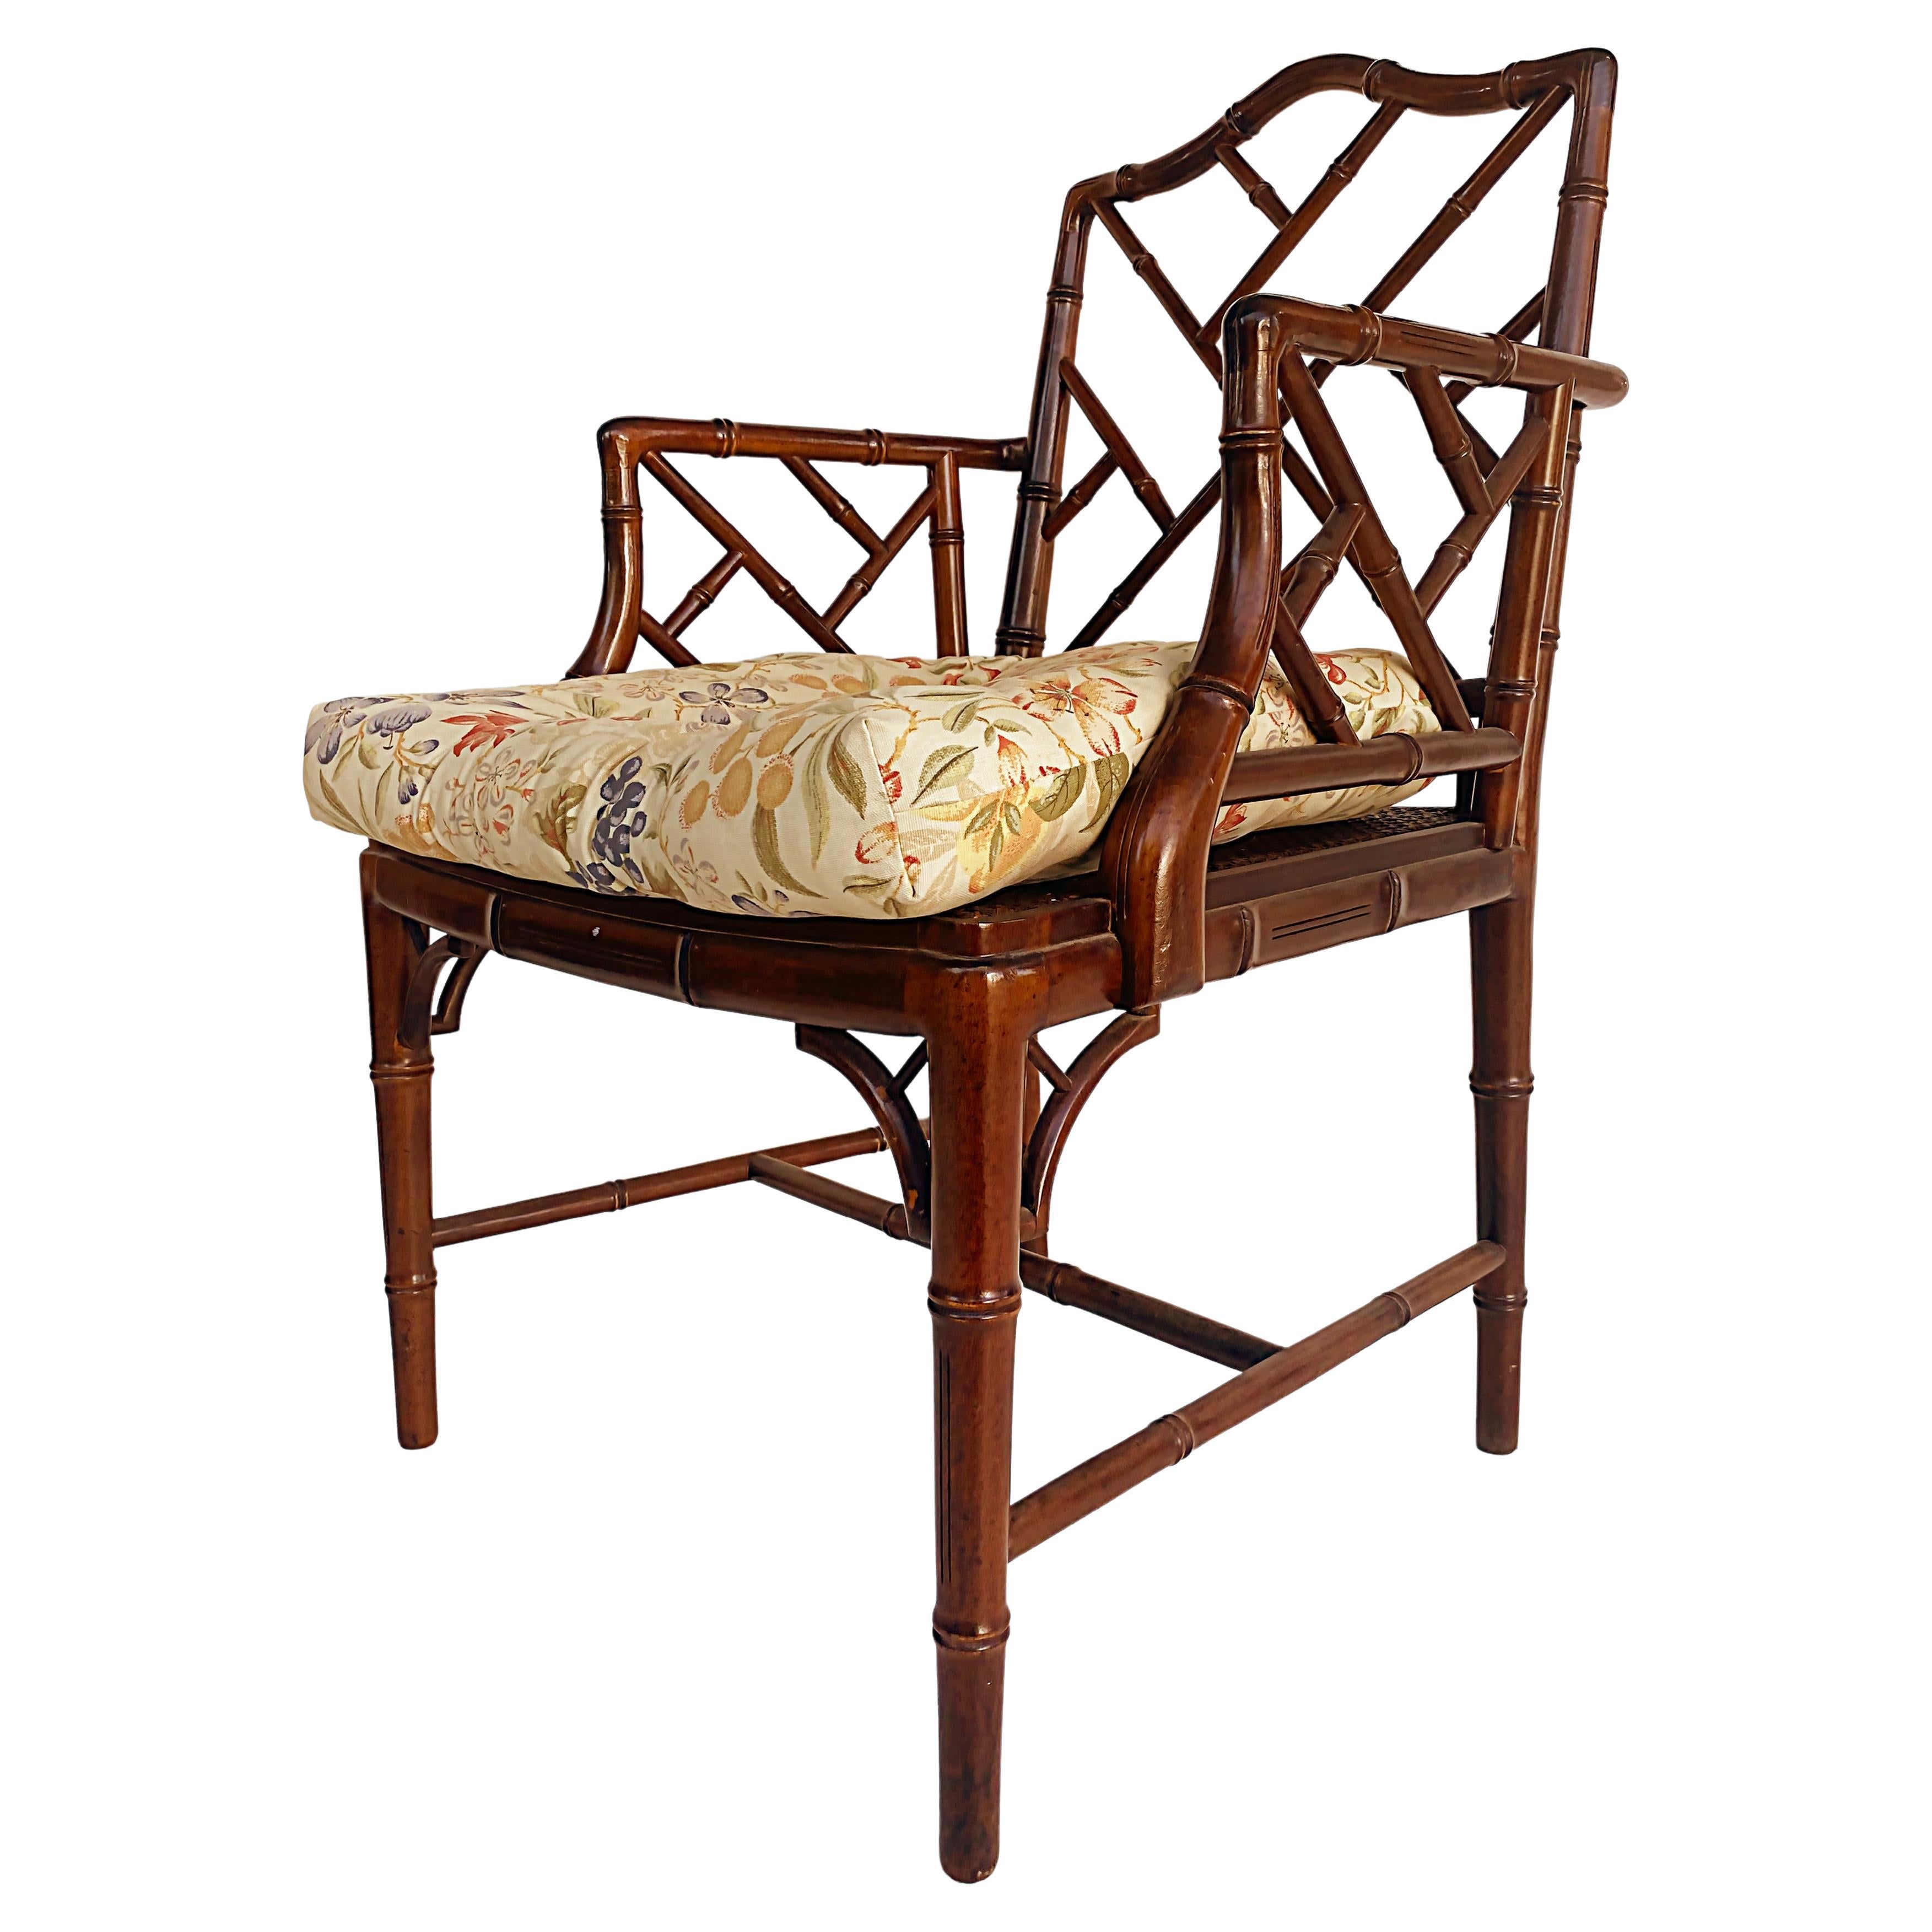 Chinese Chippendale Style Faux Bamboo Armchair, Caned Seat, Loose Seat Cushion For Sale